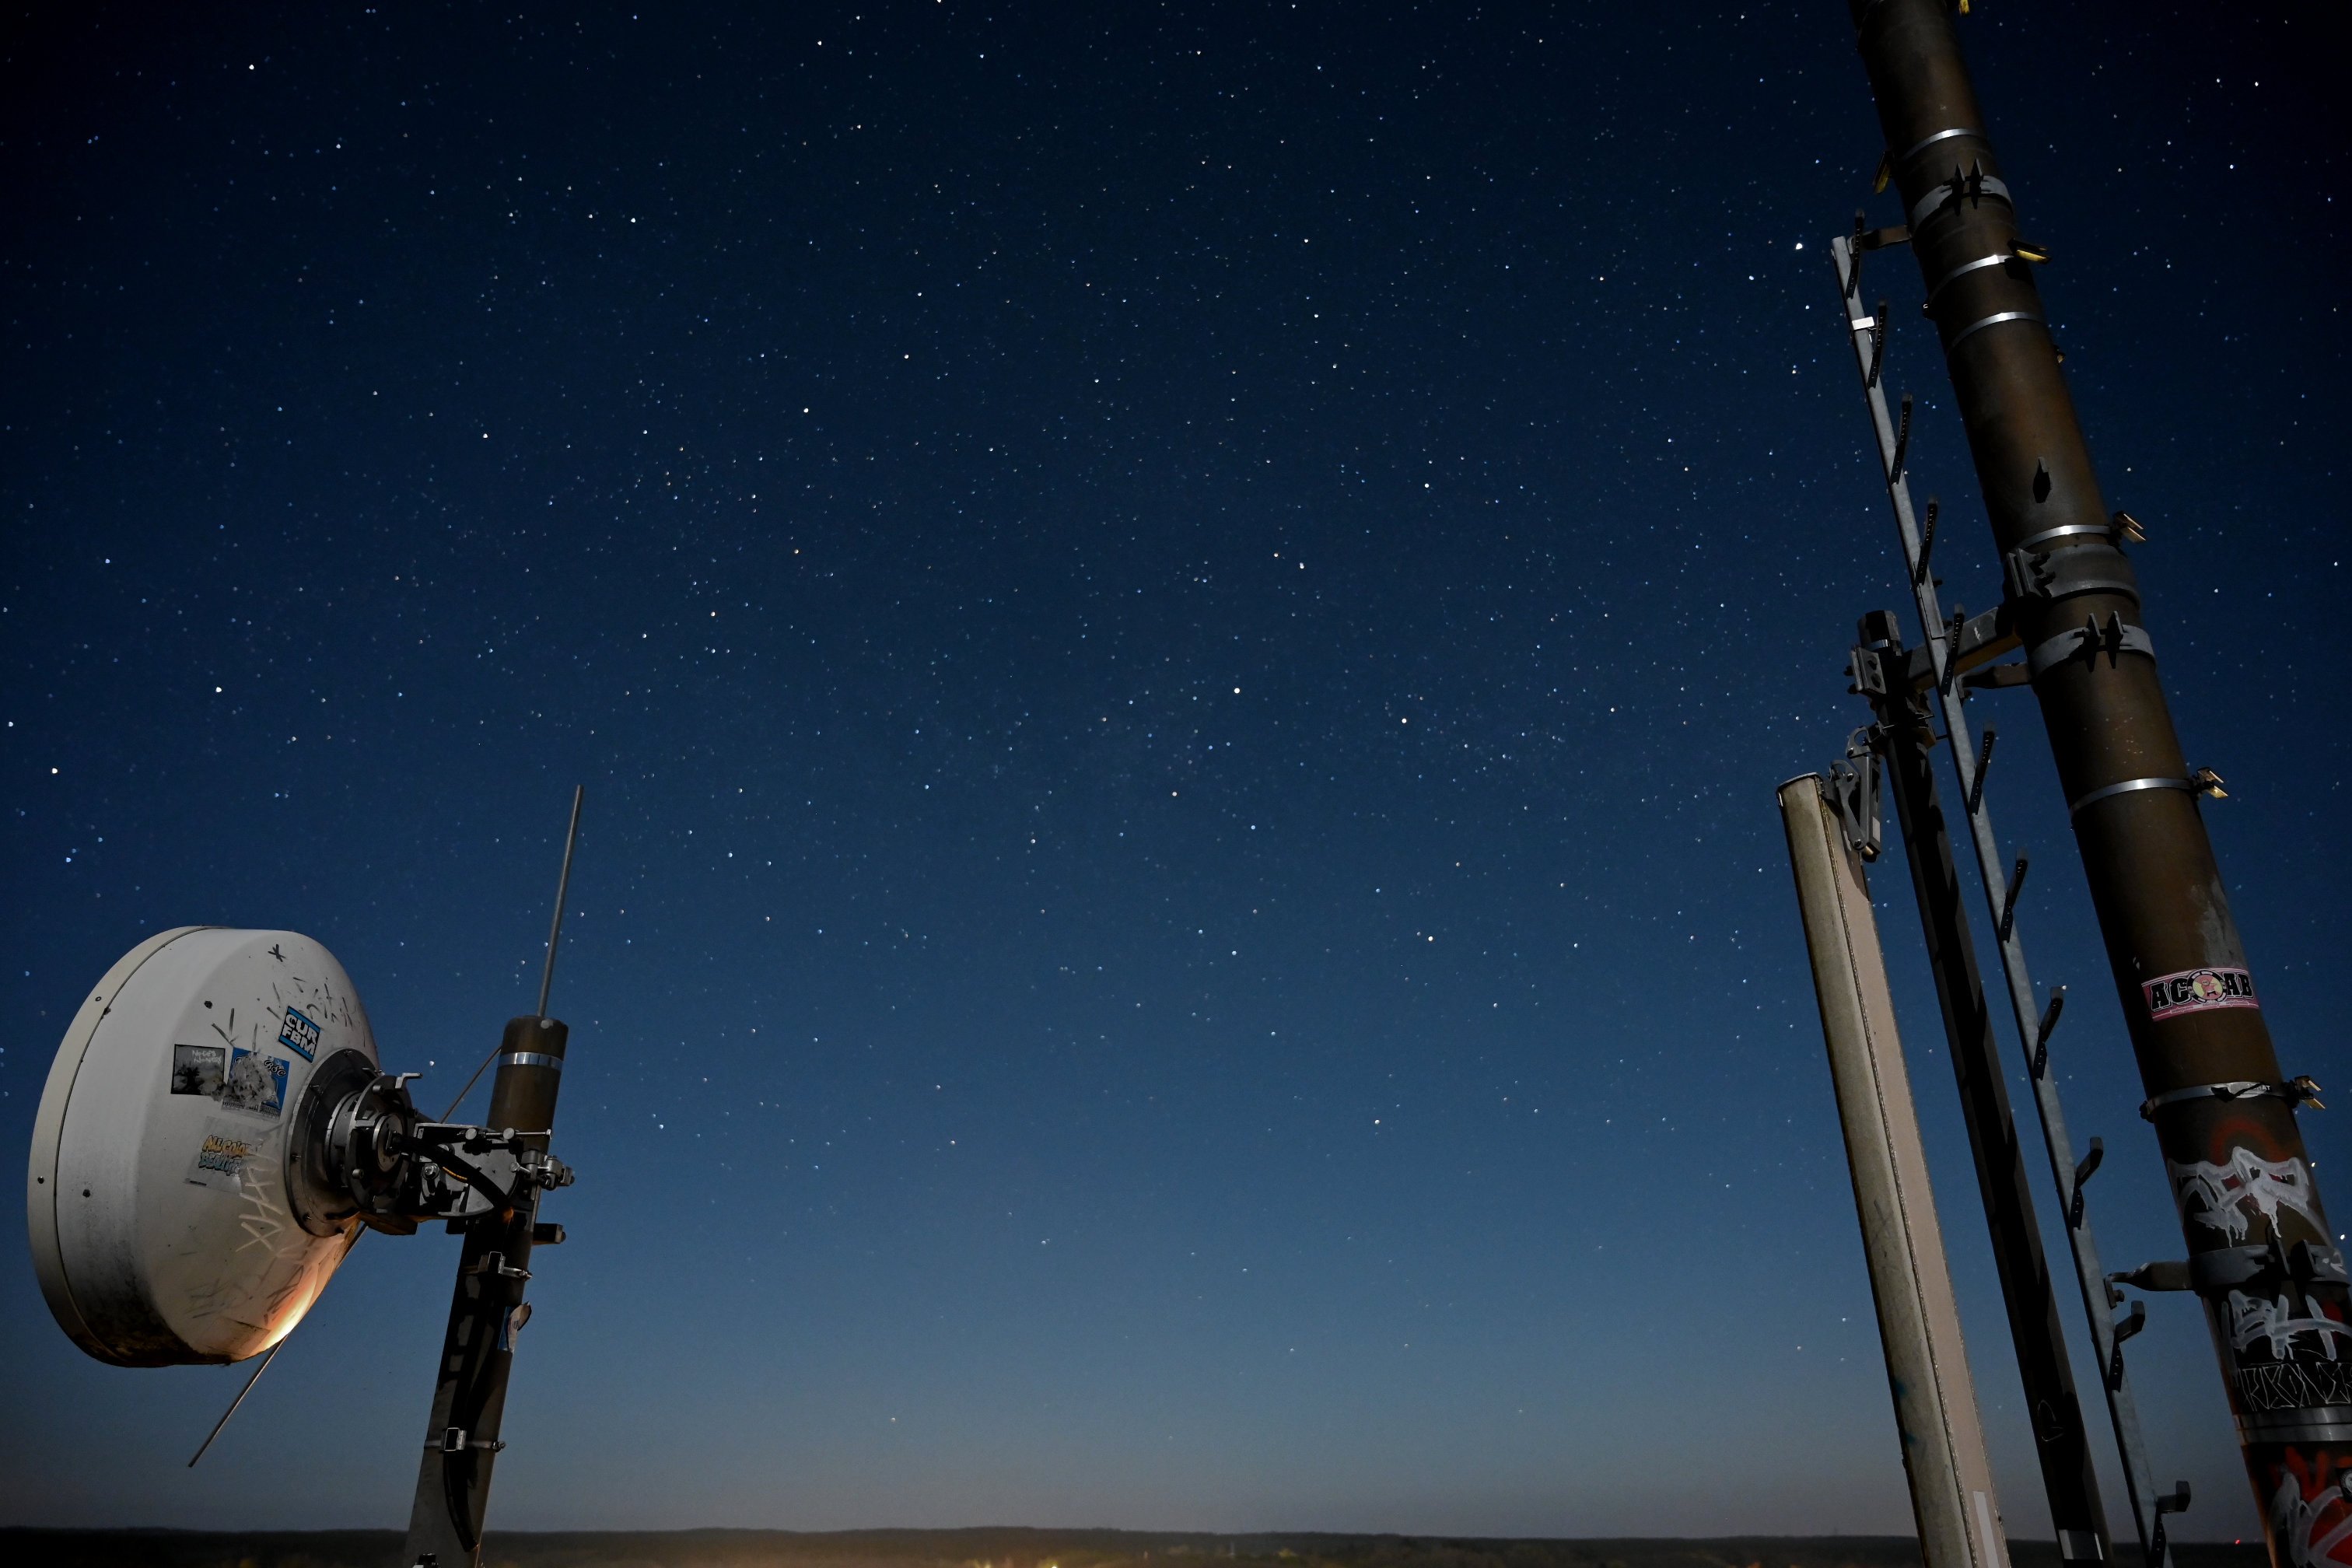 A Picture of the night's sky.  It's framed by the horizon from below, going from a warmish white with barely any stars visible to a ver deep blue with lots of stars.  on the left there is a directional radio antenna with some stickers on it. On the right is a mobile phone pole with ladder and antenna